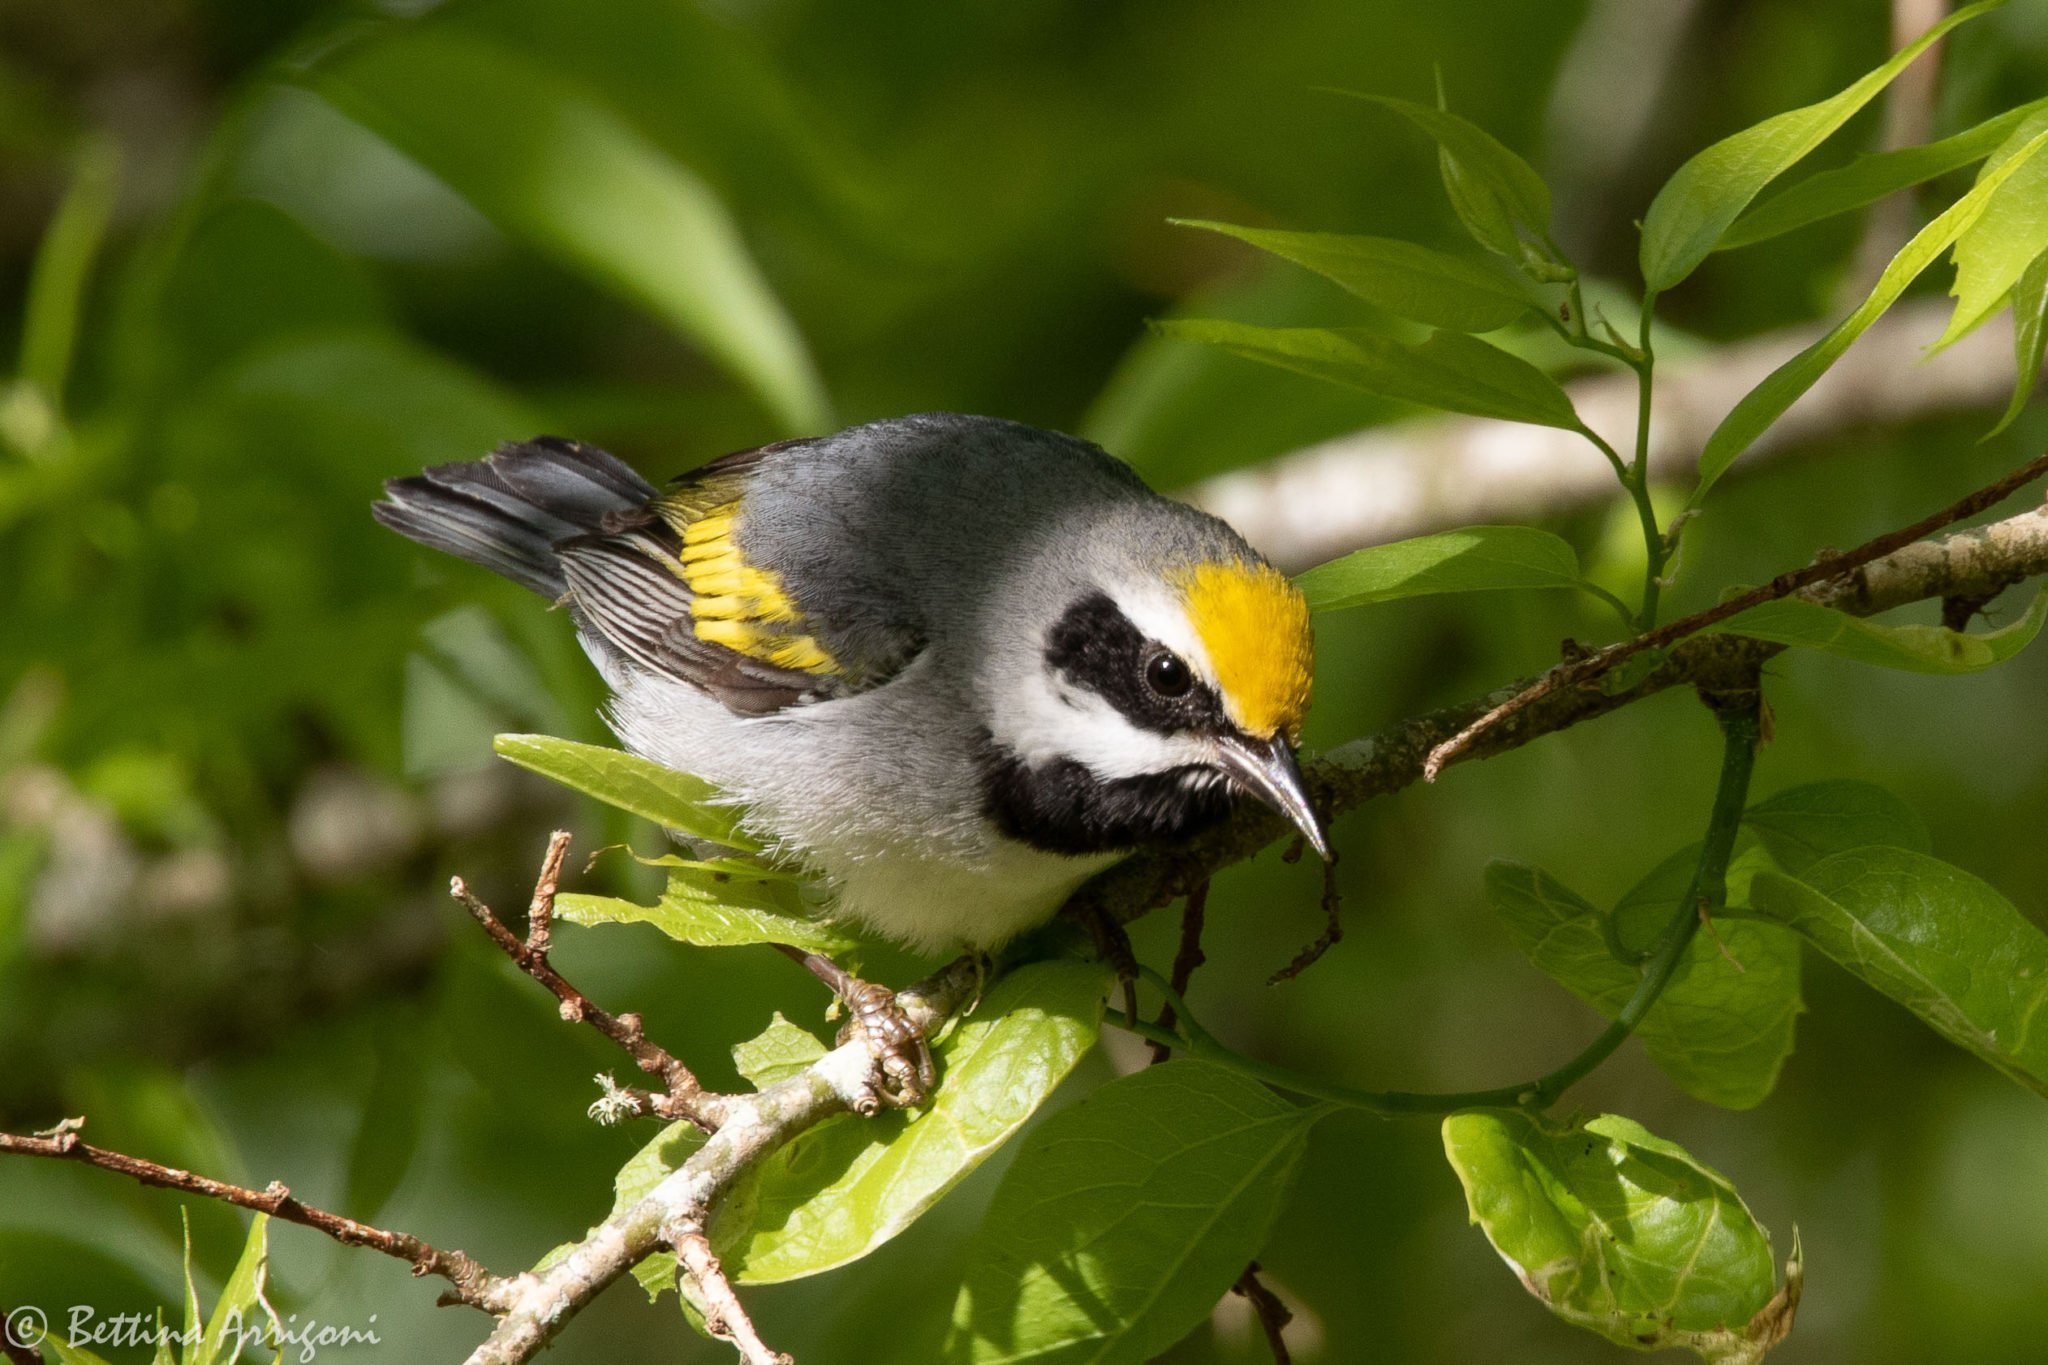 This is a male golden-winged warbler. The warbler is one of several threatened species that Hudson Farm is trying to help through improved habitat. Photo by Bettina Arrigoni/CC BY (https://creativecommons.org/licenses/by/2.0), via Wikimedia Commons